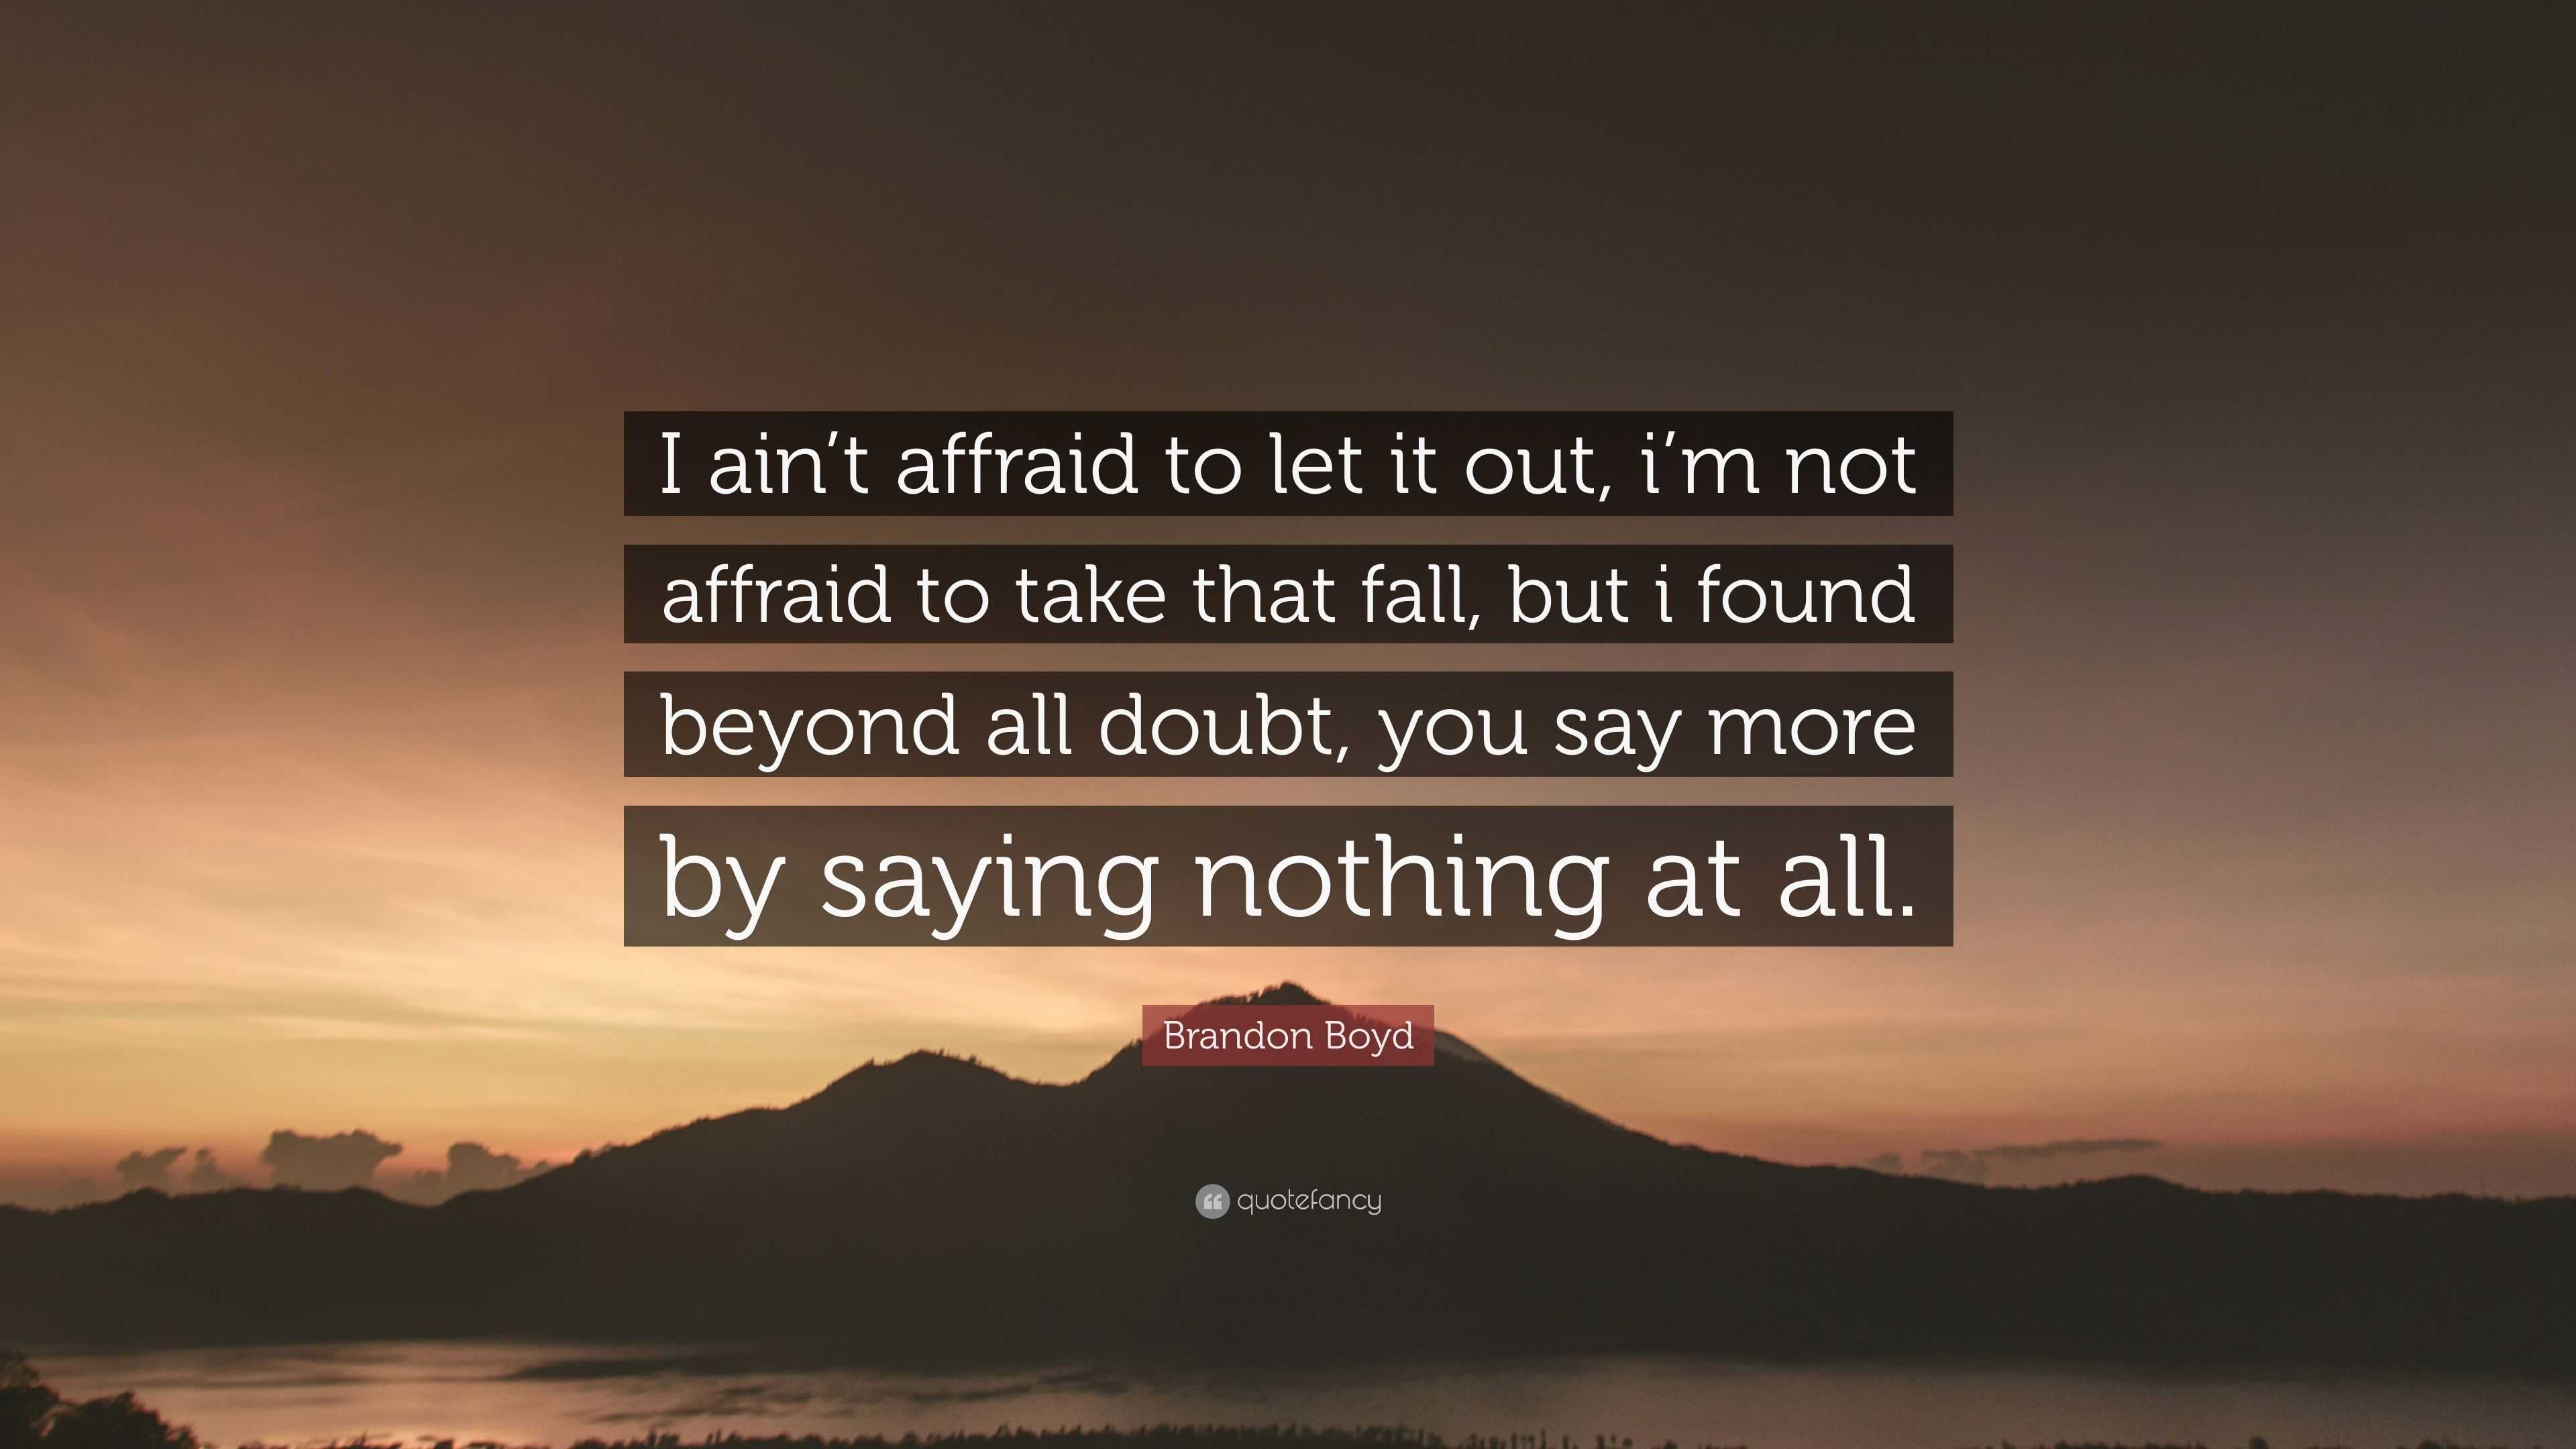 Brandon Boyd Quote I Ain T Affraid To Let It Out I M Not Affraid To Take That Fall But I Found Beyond All Doubt You Say More By Saying N